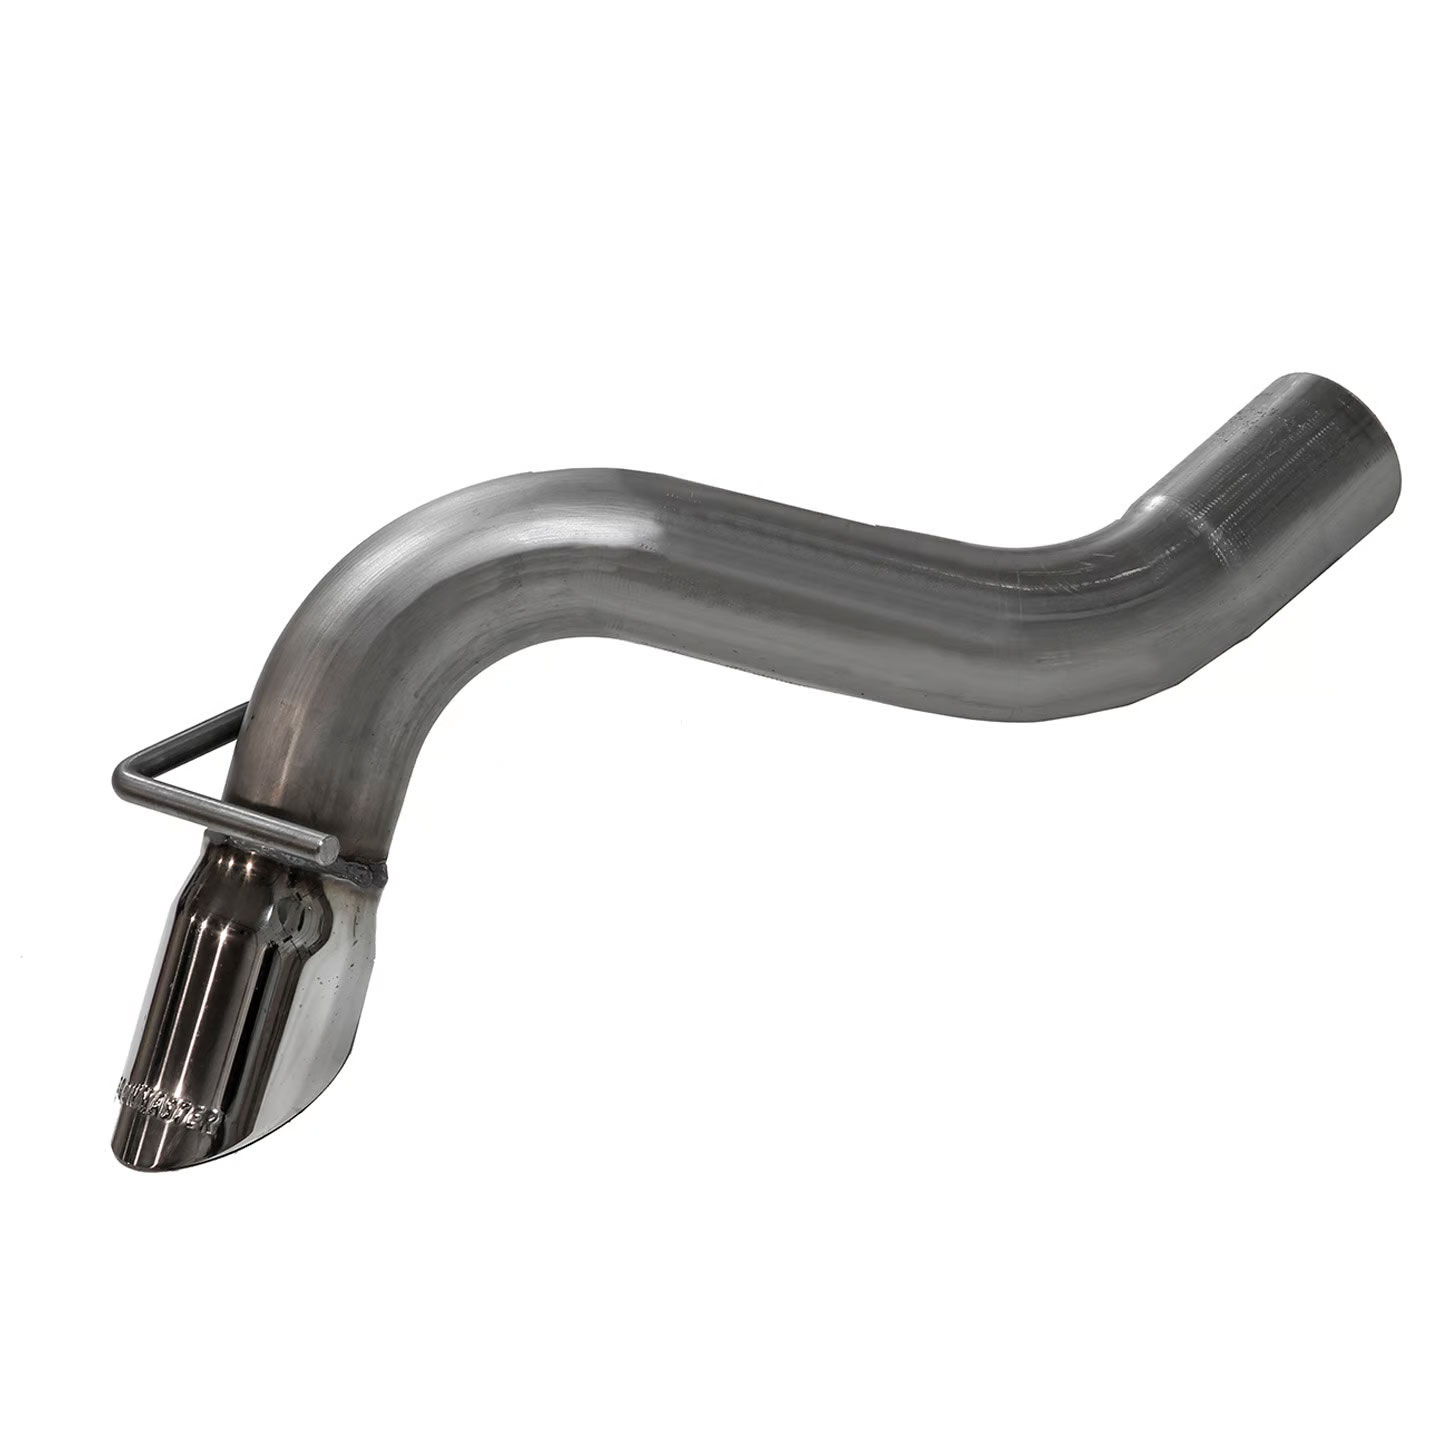 Flowmaster Outlaw Axle-Back Exhaust System 818125